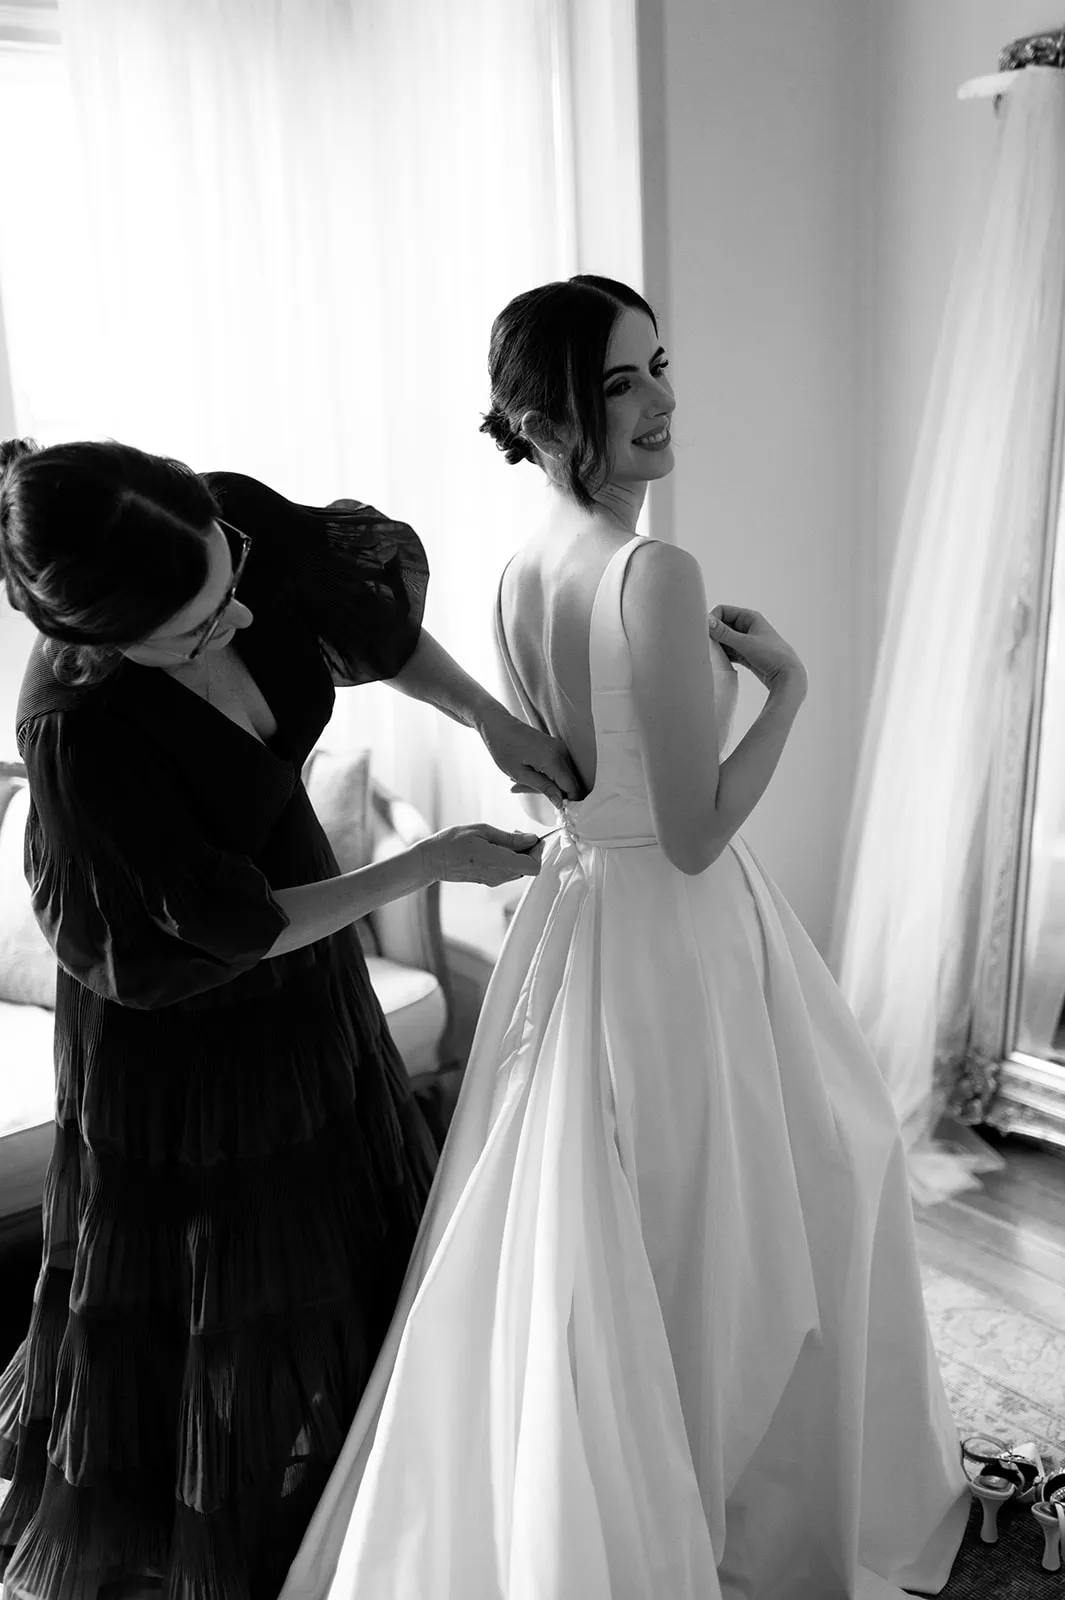 A bride, smiling and looking over her shoulder, stands in a room as another woman helps her with the back of her dress. The bride's gown is elegant with a flowing train. The scene is captured in black and white, adding a timeless quality to the moment.